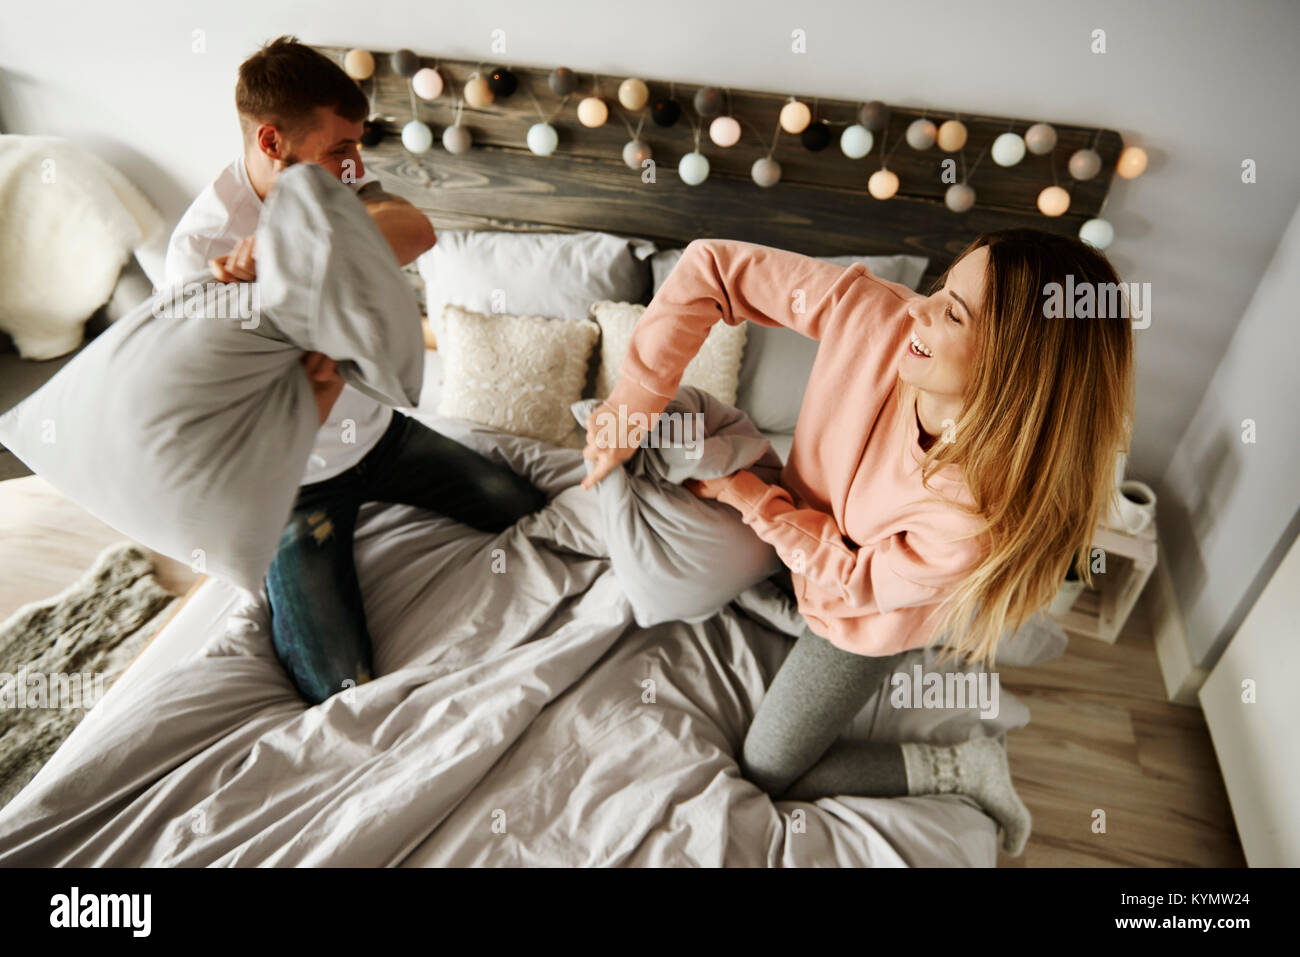 Couple fighting with pillows in bedroom Stock Photo